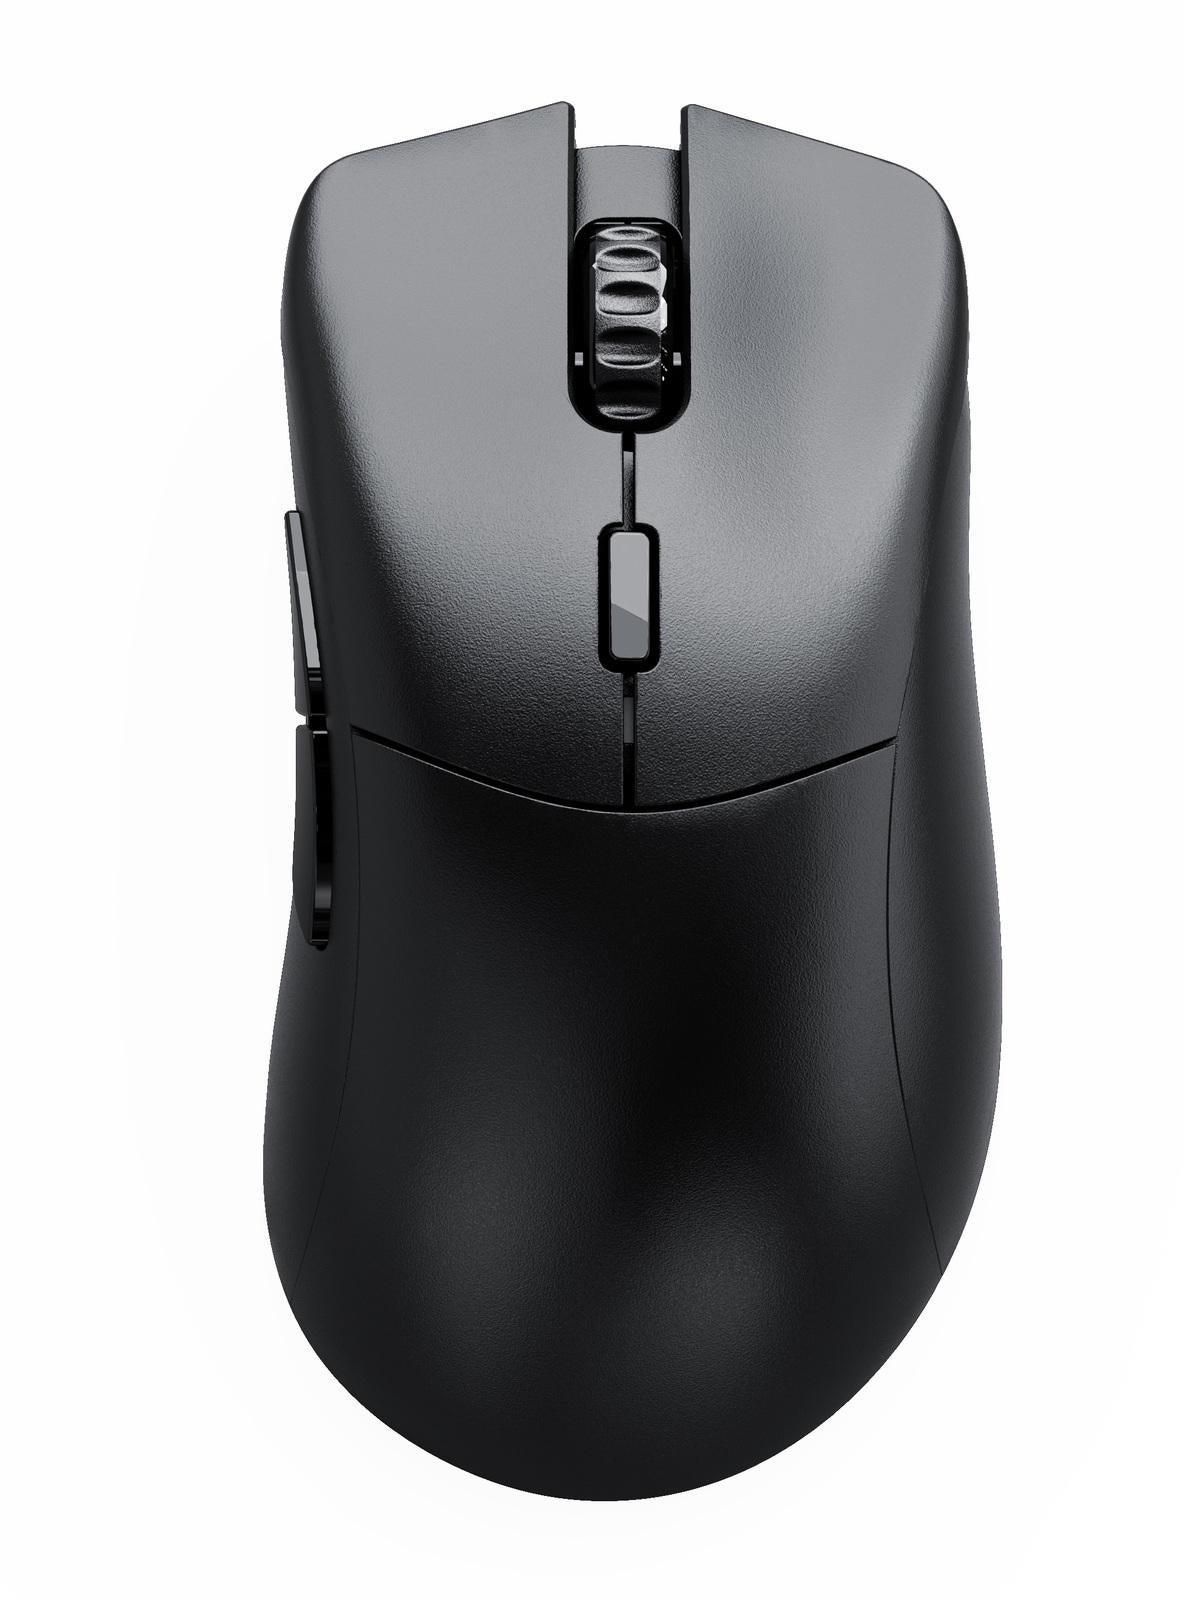 Glorious Model D 2 PRO Wireless Gaming Mouse - 4K/8K Polling